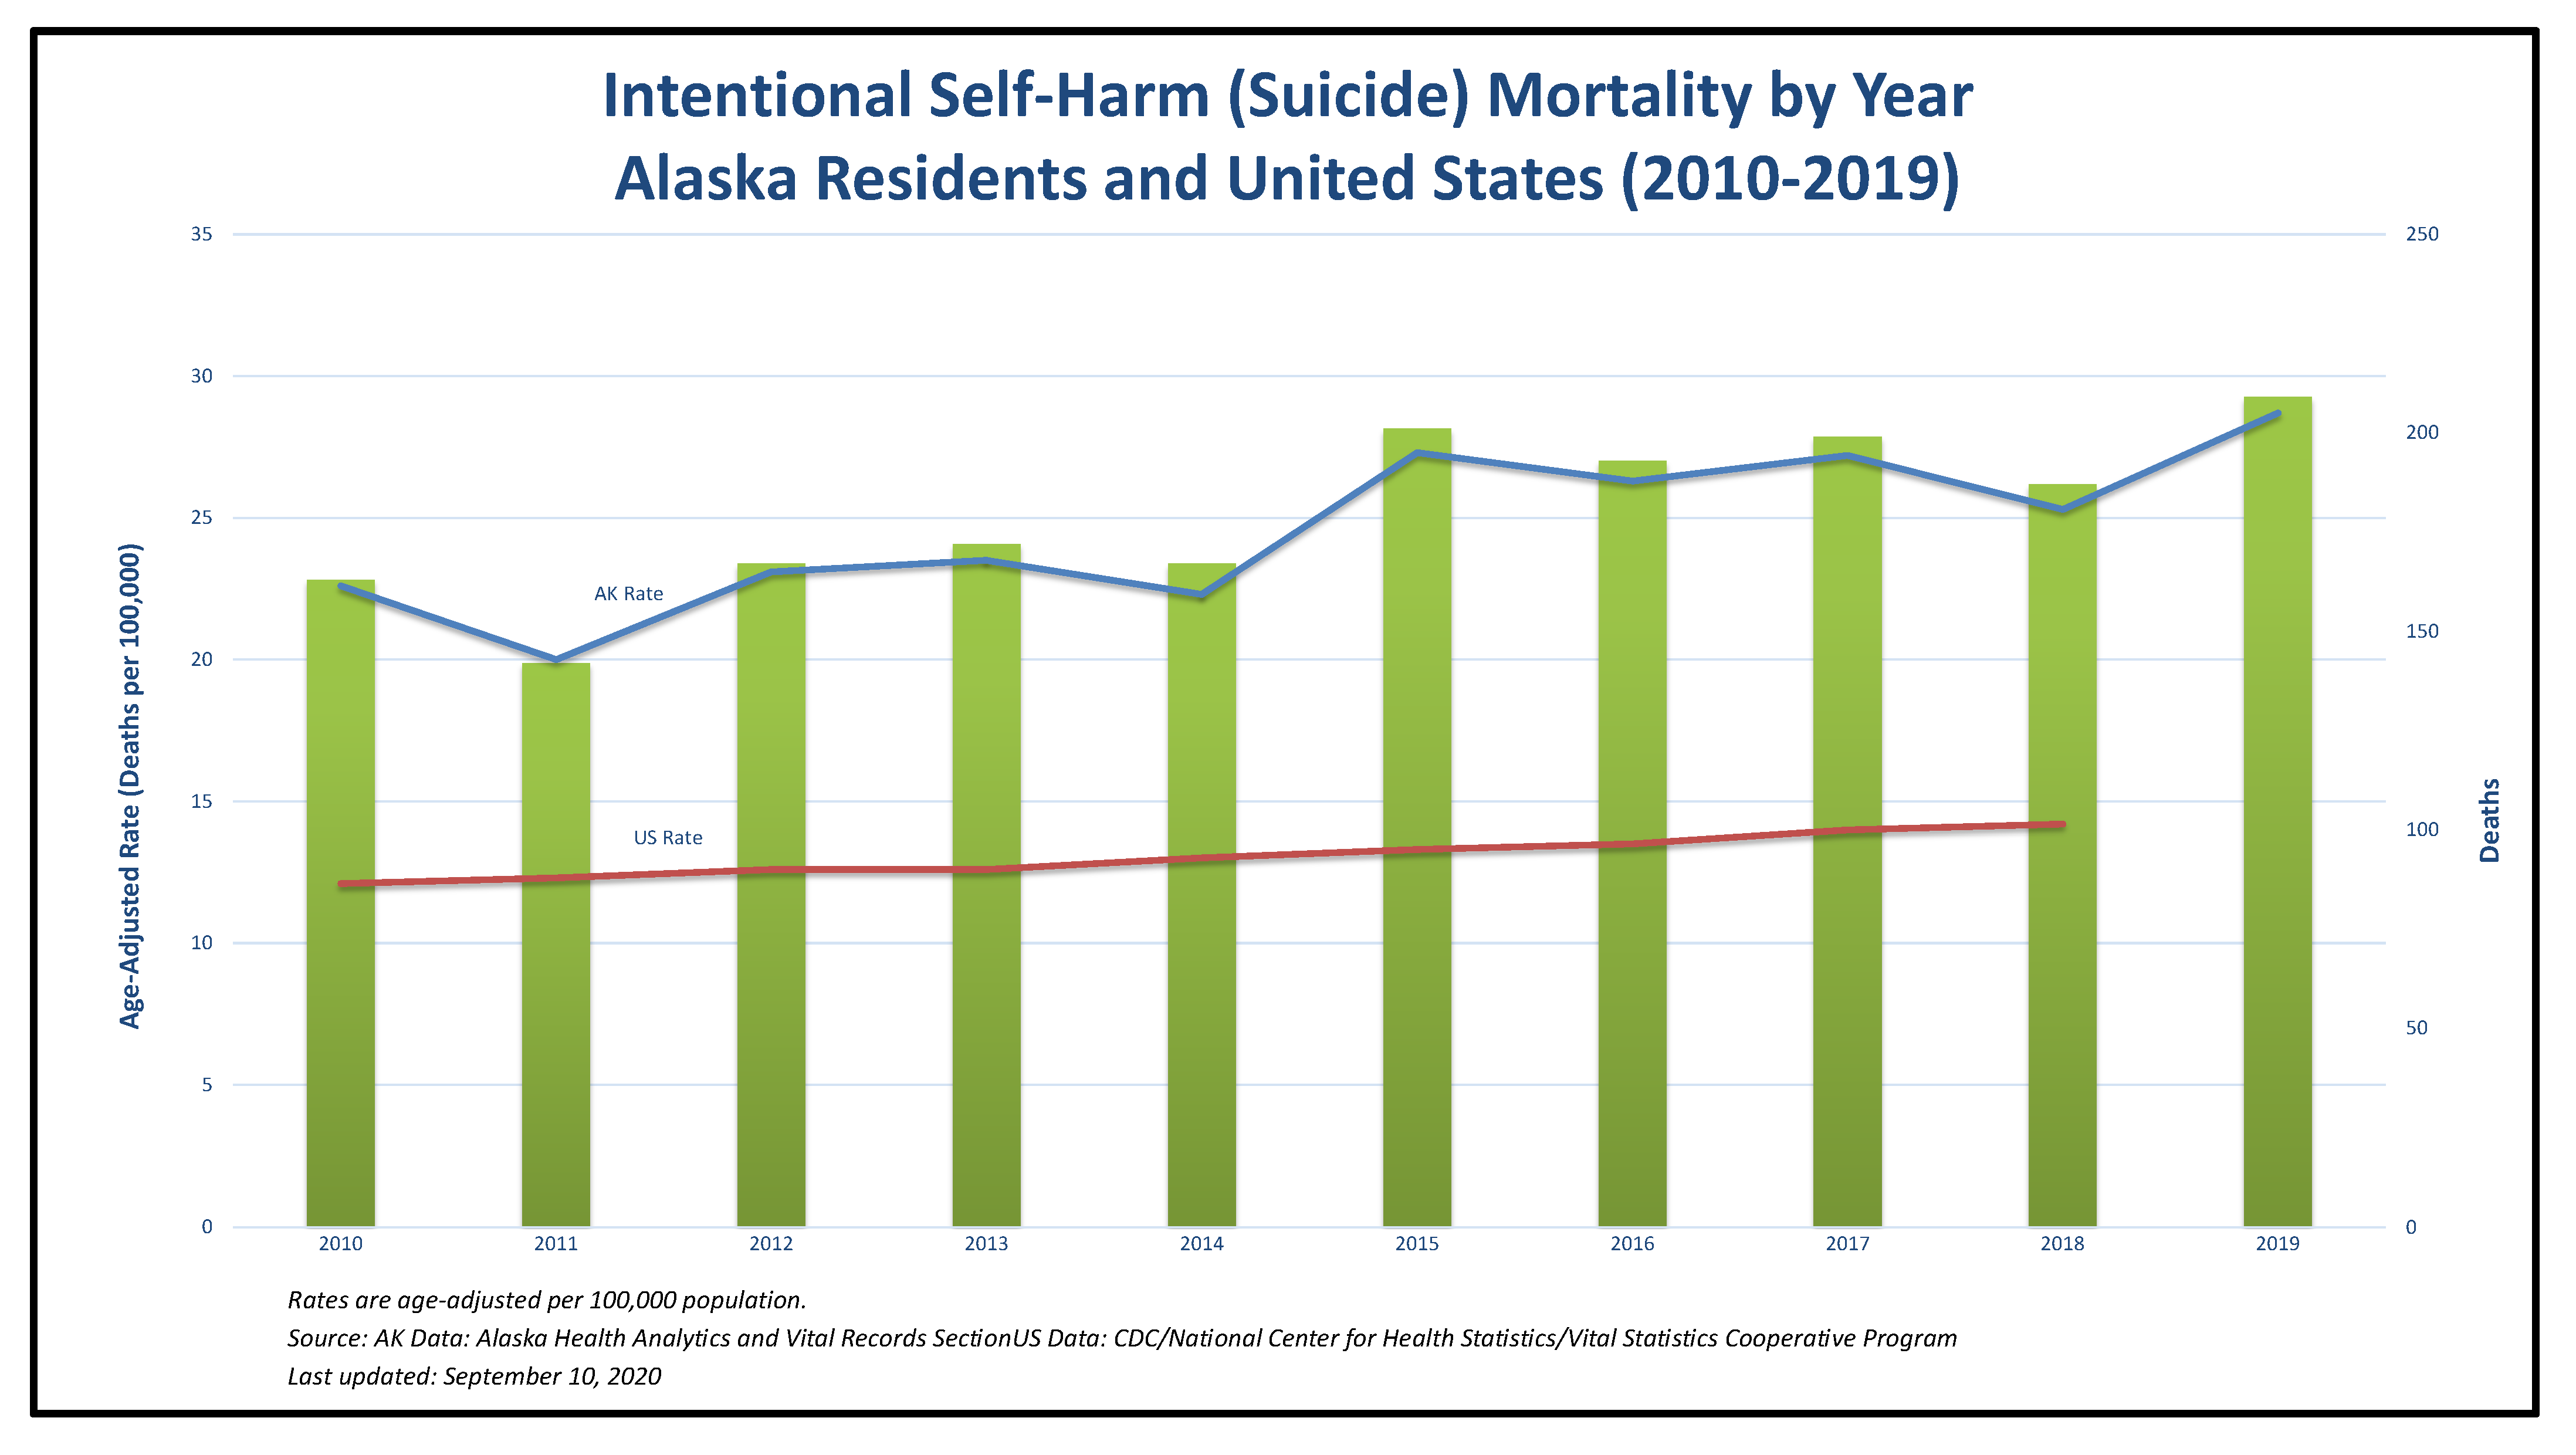 Intentional Self-Hard (Suicide) Mortality by Year, Alaska Residents and the US (2010-2019), Chart showing Alaska increasing at a faster rate than the US